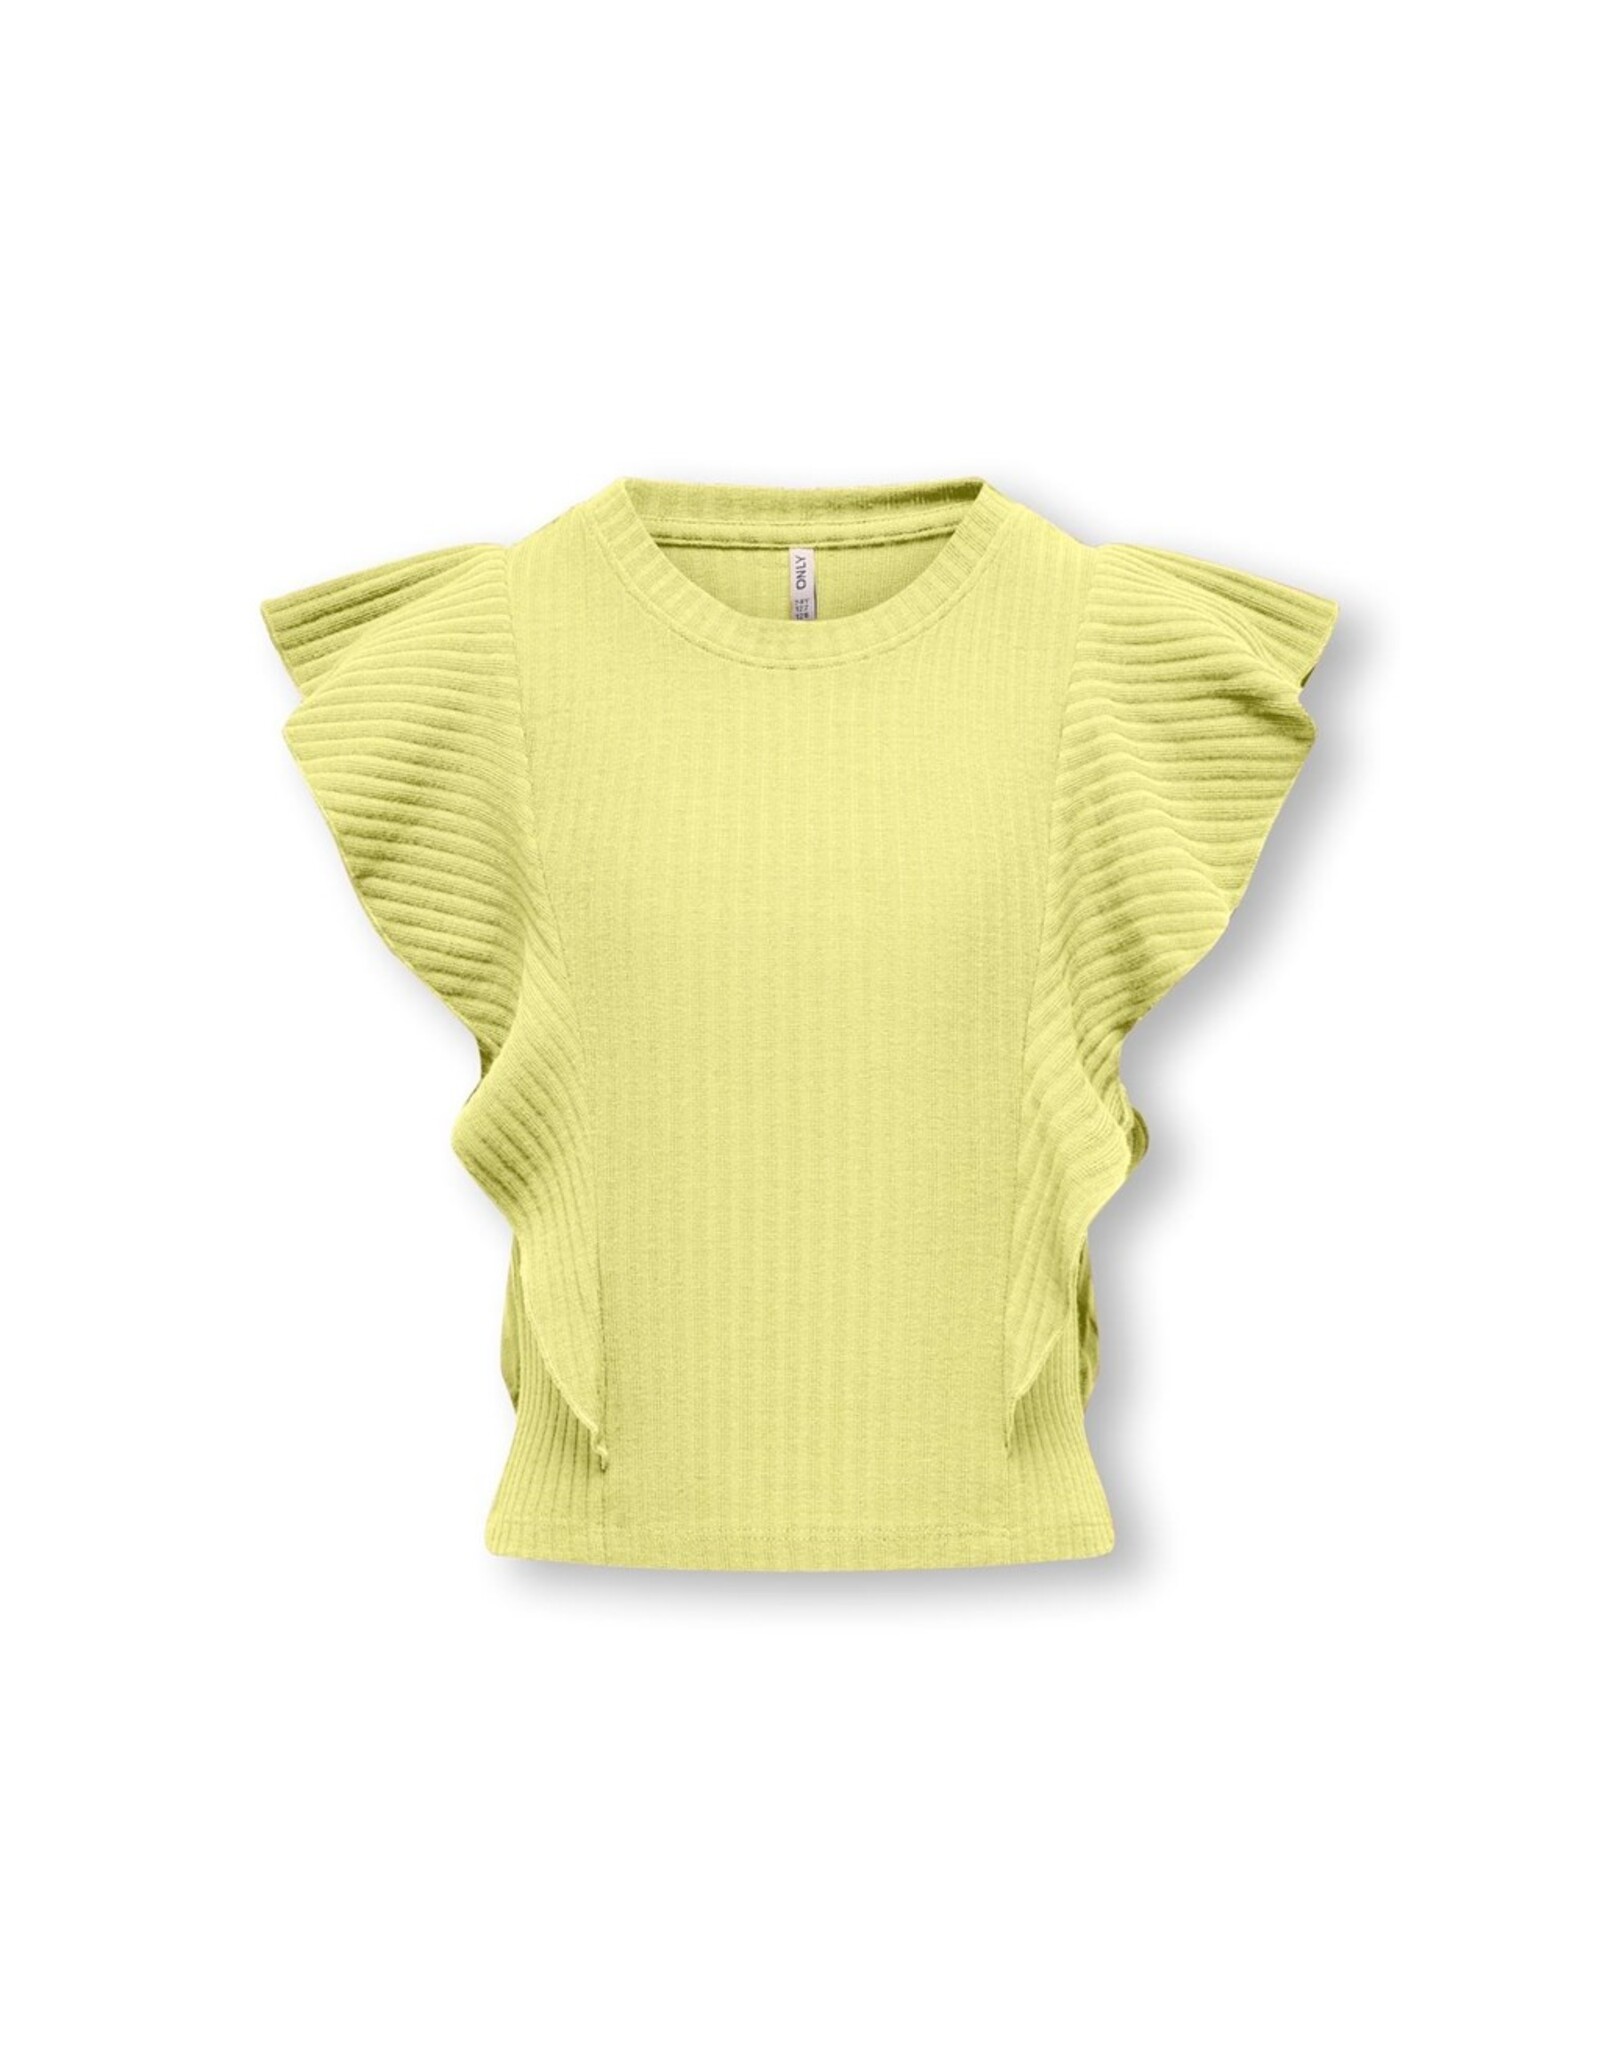 Kids Only T-Shirts & Tops KOGNELLA S/L SHORT RUFFLE TOP JRS Yellow Pear 15291900